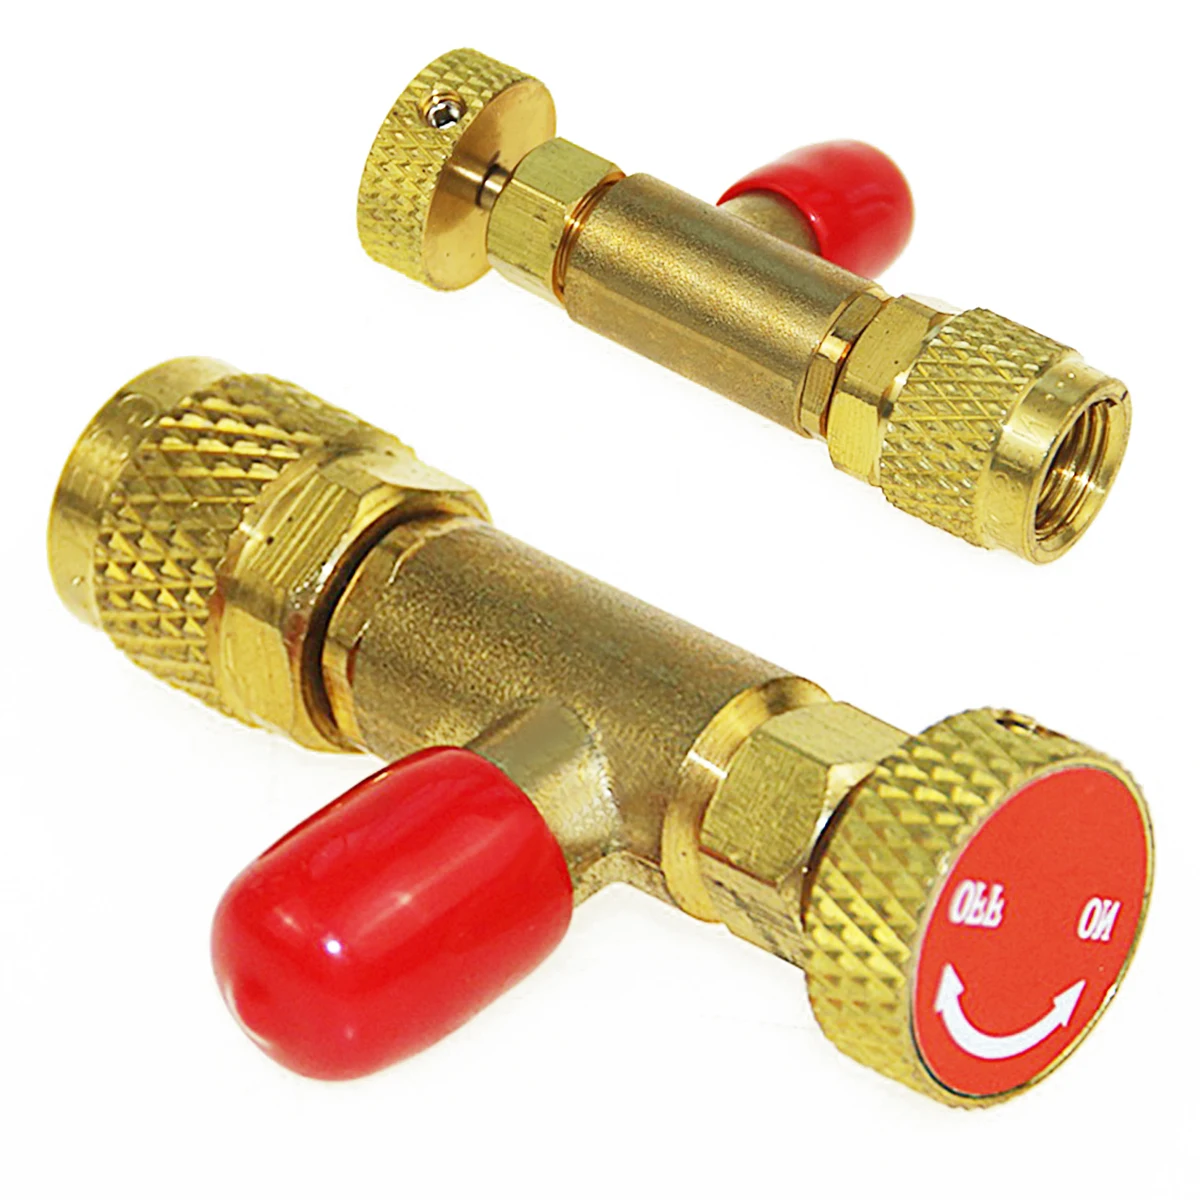 R410A Refrigeration Air conditioning Valve Safety Adapter 1/4